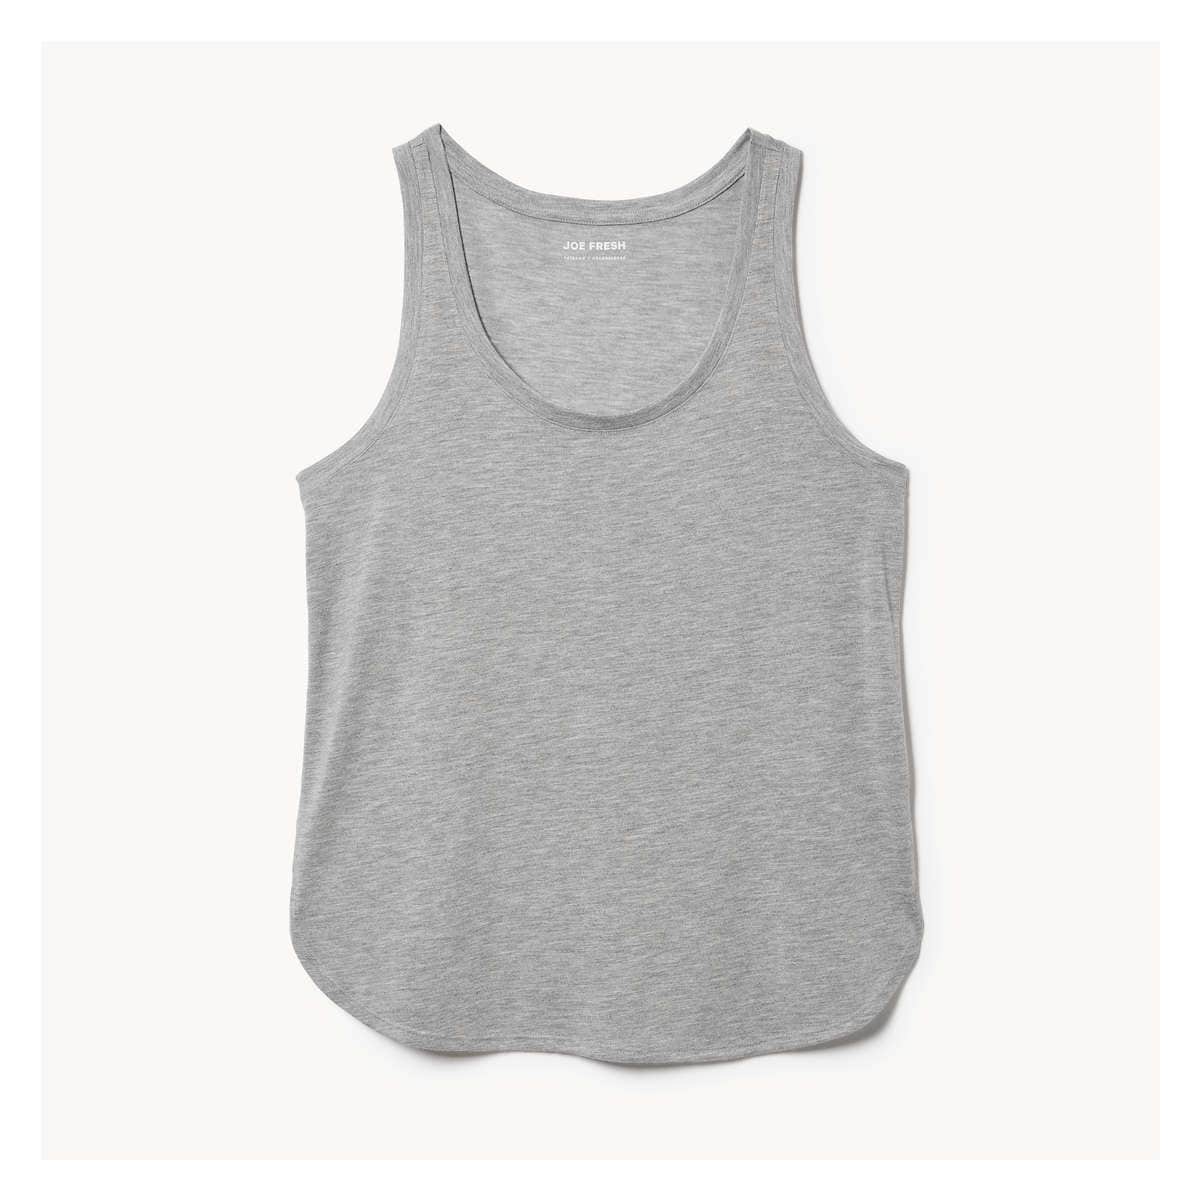 Relaxed-Fit Tank in Light Grey Mix from Joe Fresh